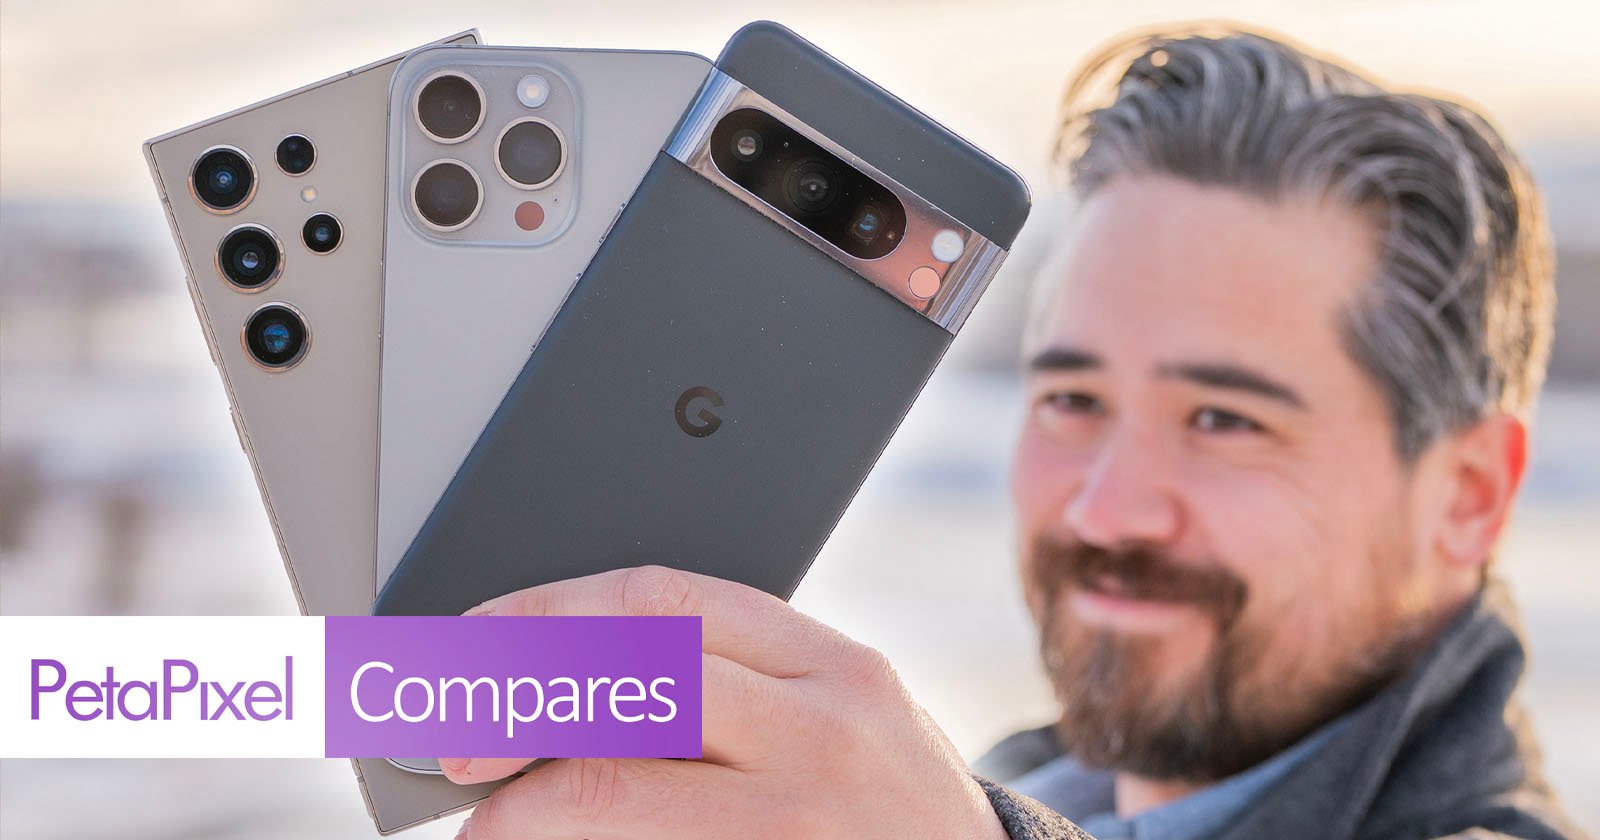 The Battle of the Big Three: Which Smartphone Delivers the Best Images?